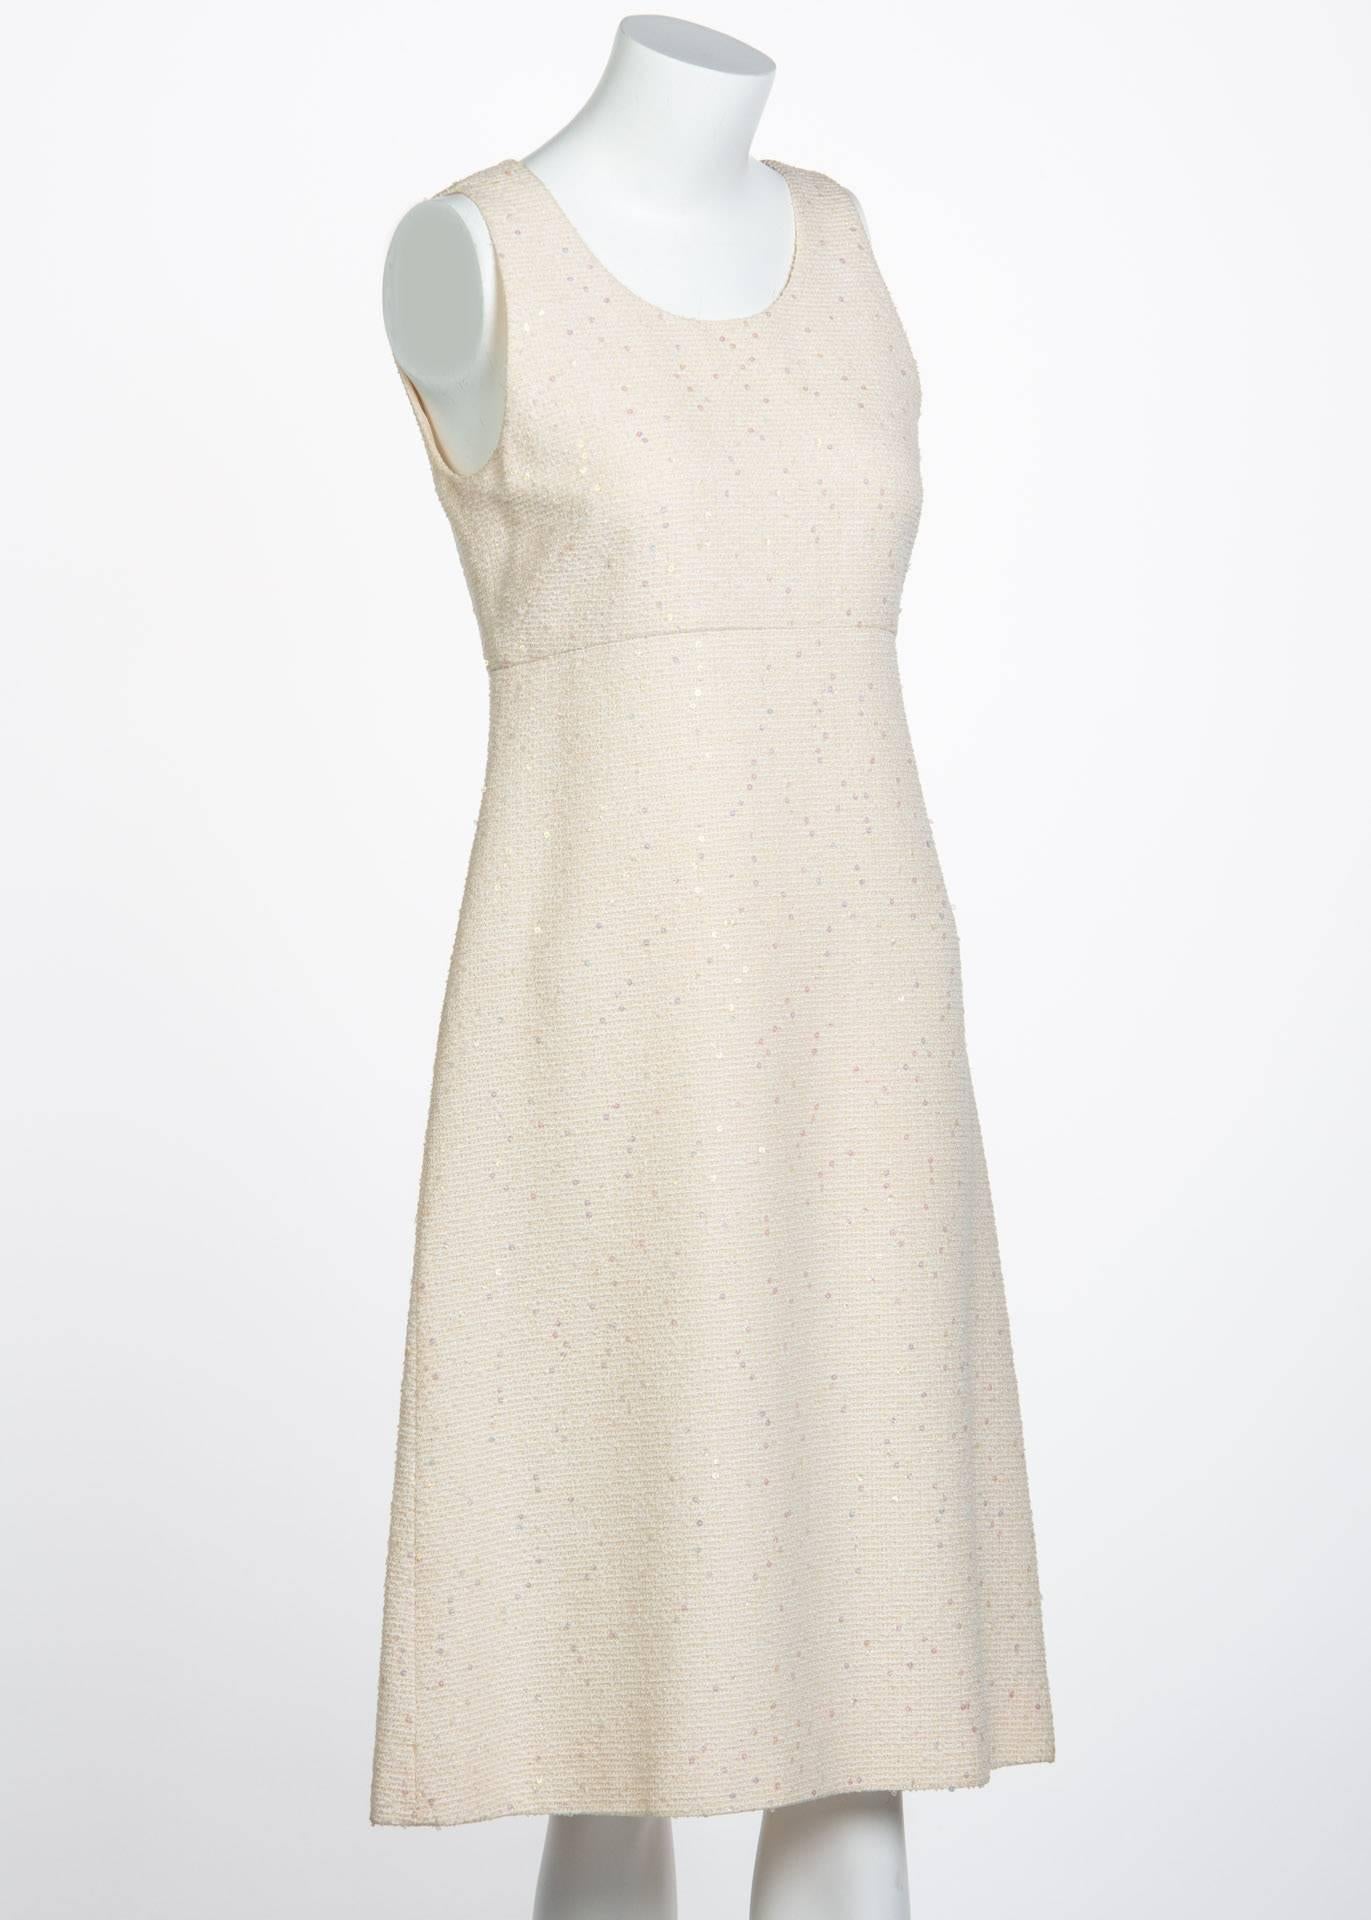 Beige Chanel Sequence Boucle Pale Pink Sleeveless Dress, 2000 